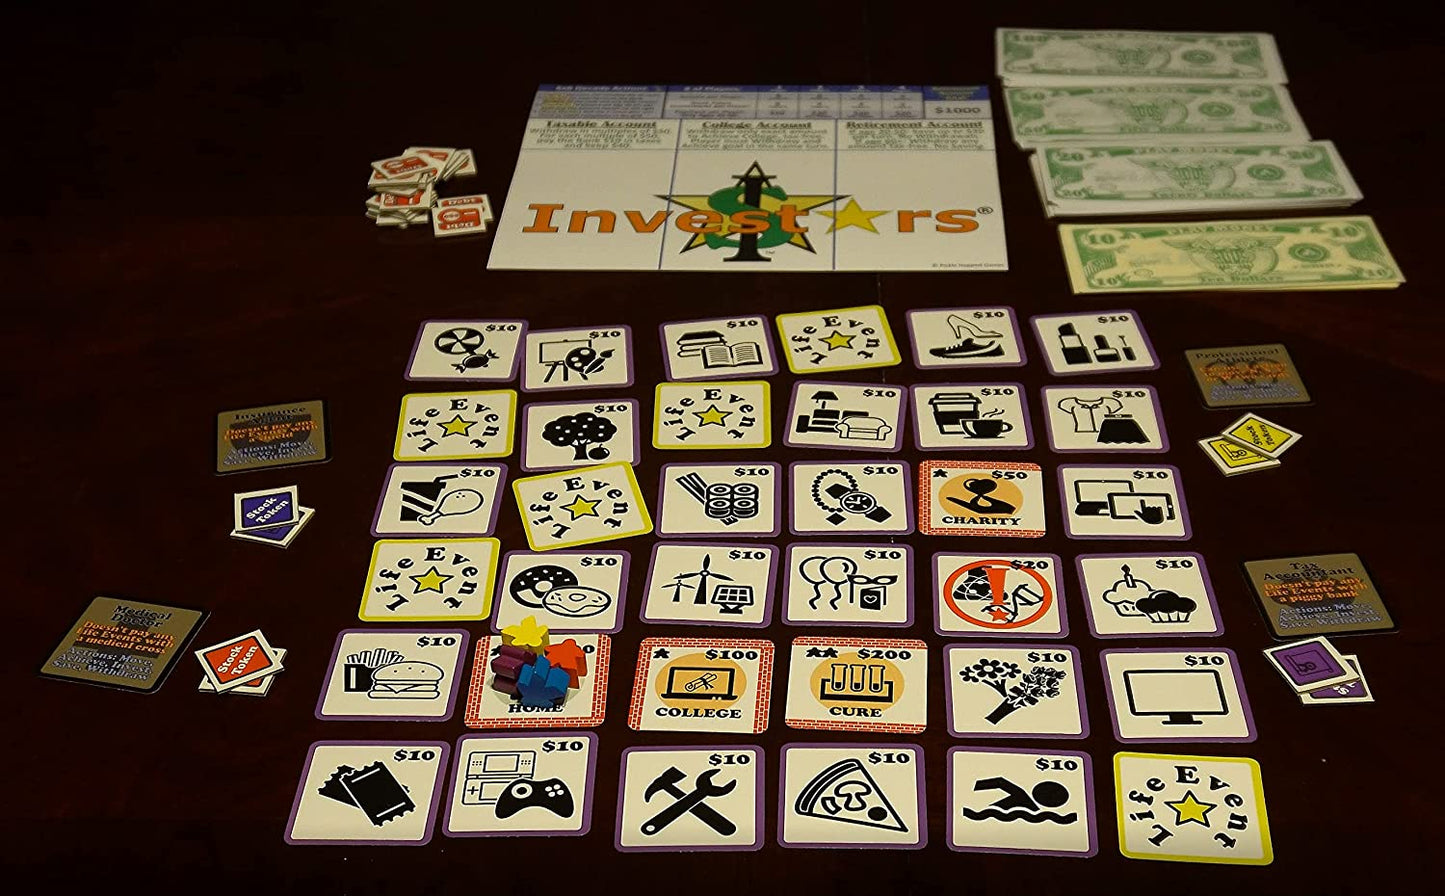 Investars Collaborative Educational Investing Game for Young Adults and Their Parents